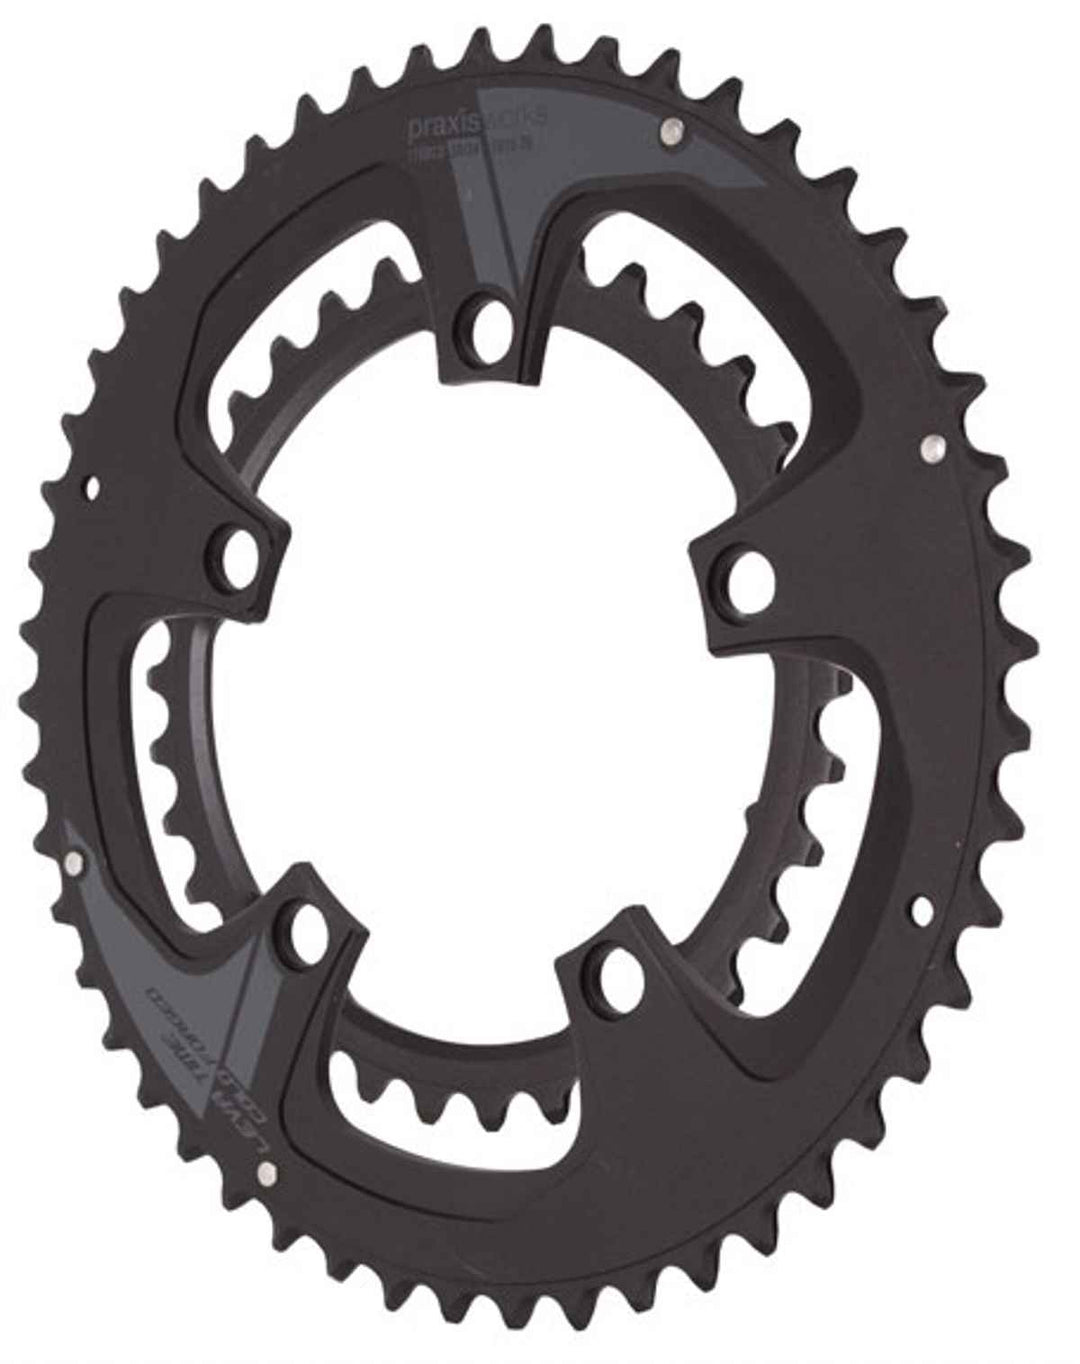 Praxis Buzz 10/11/12 Speed Chainring (Two Tone Black)